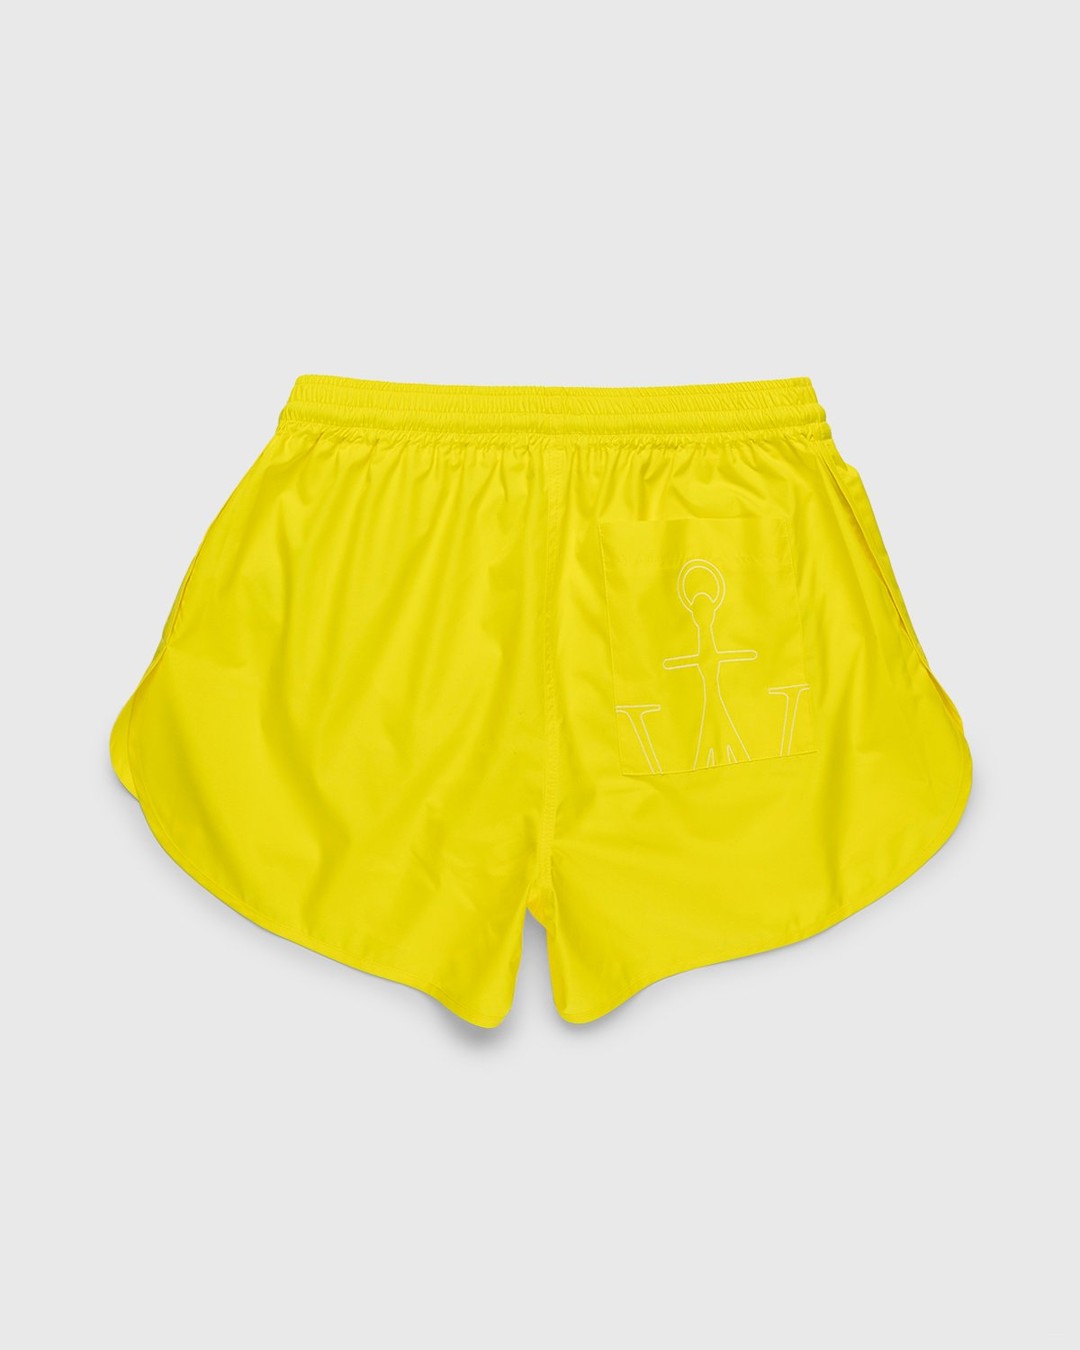 J.W. Anderson – Polyester Running Shorts Yellow - Short Cuts - Yellow - Image 2